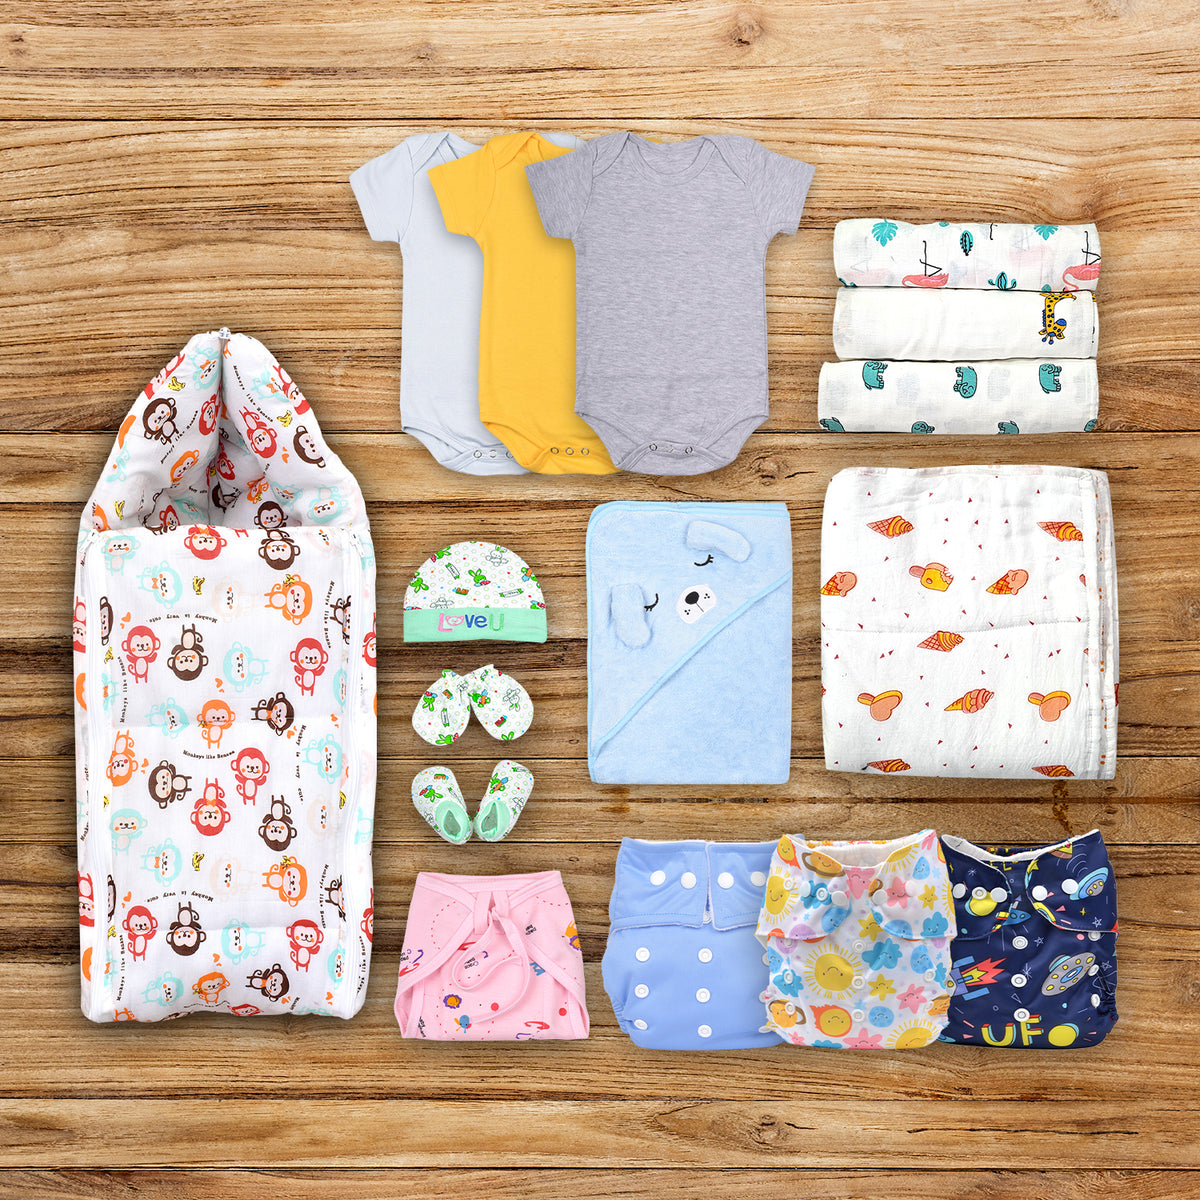 New Born Baby Essentials  Combo Set @ 499 (When you buy 6 or more items)